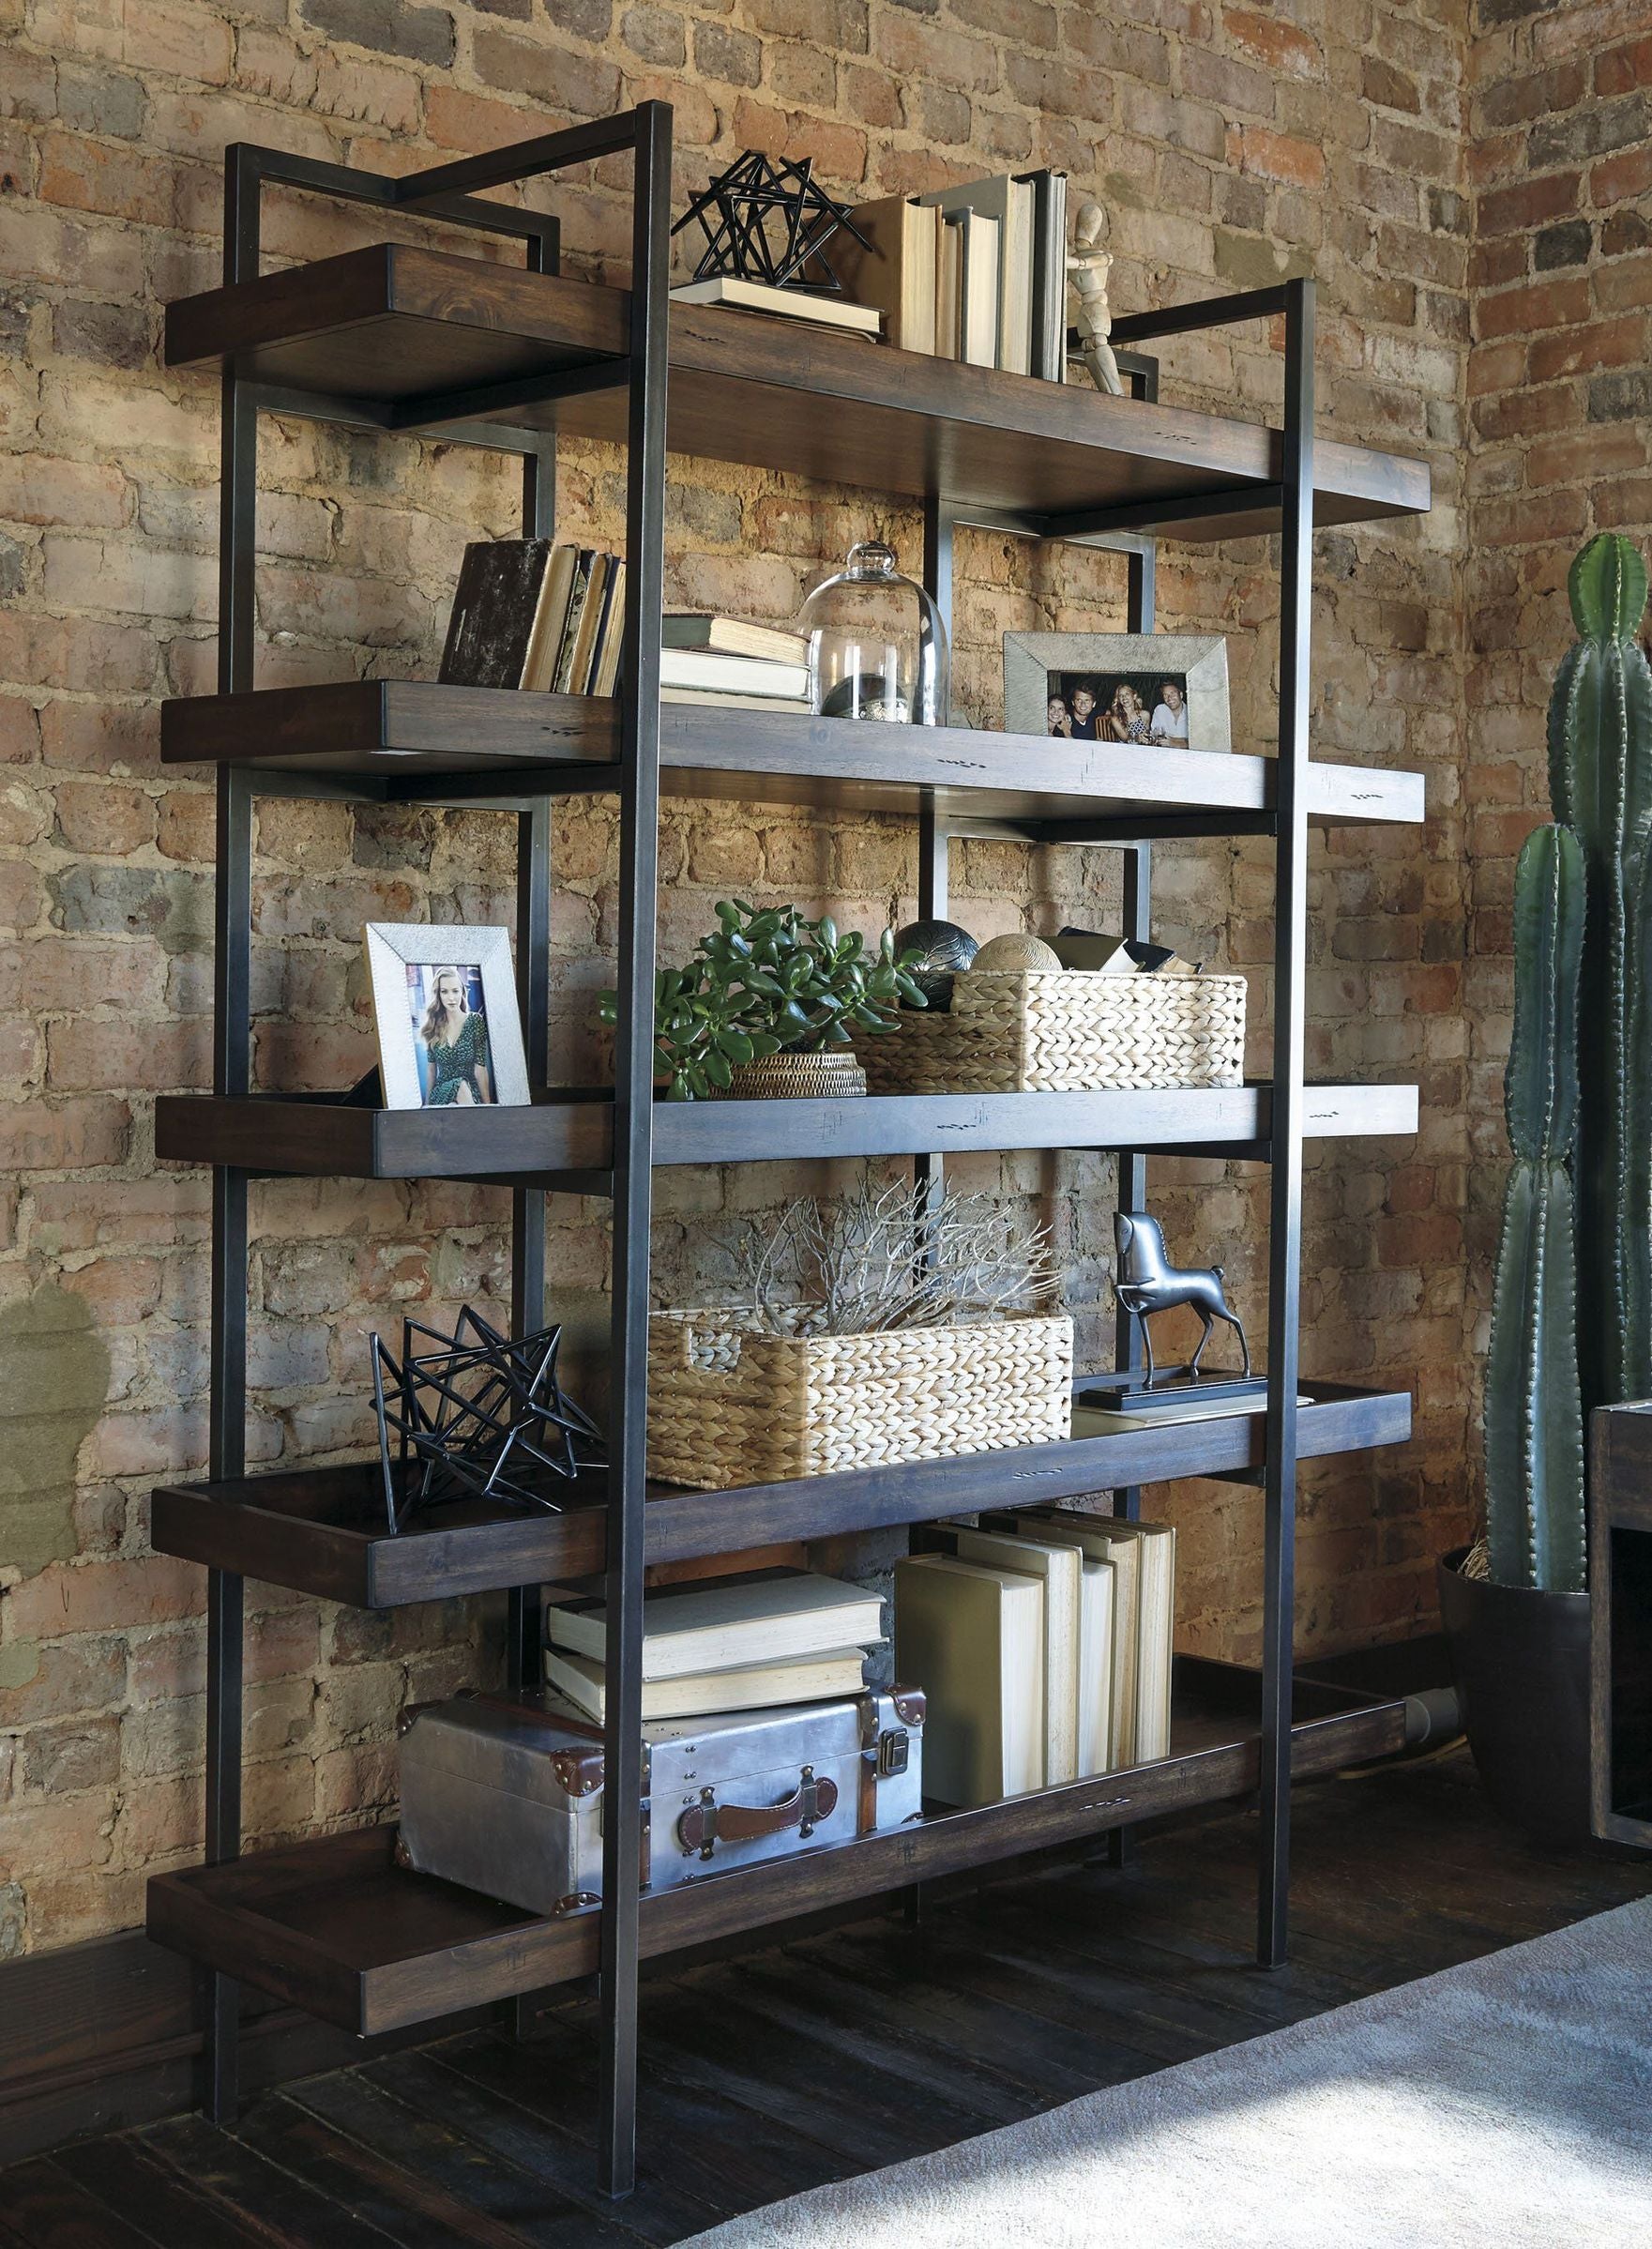 Bookcases, Shelves & Cabinets